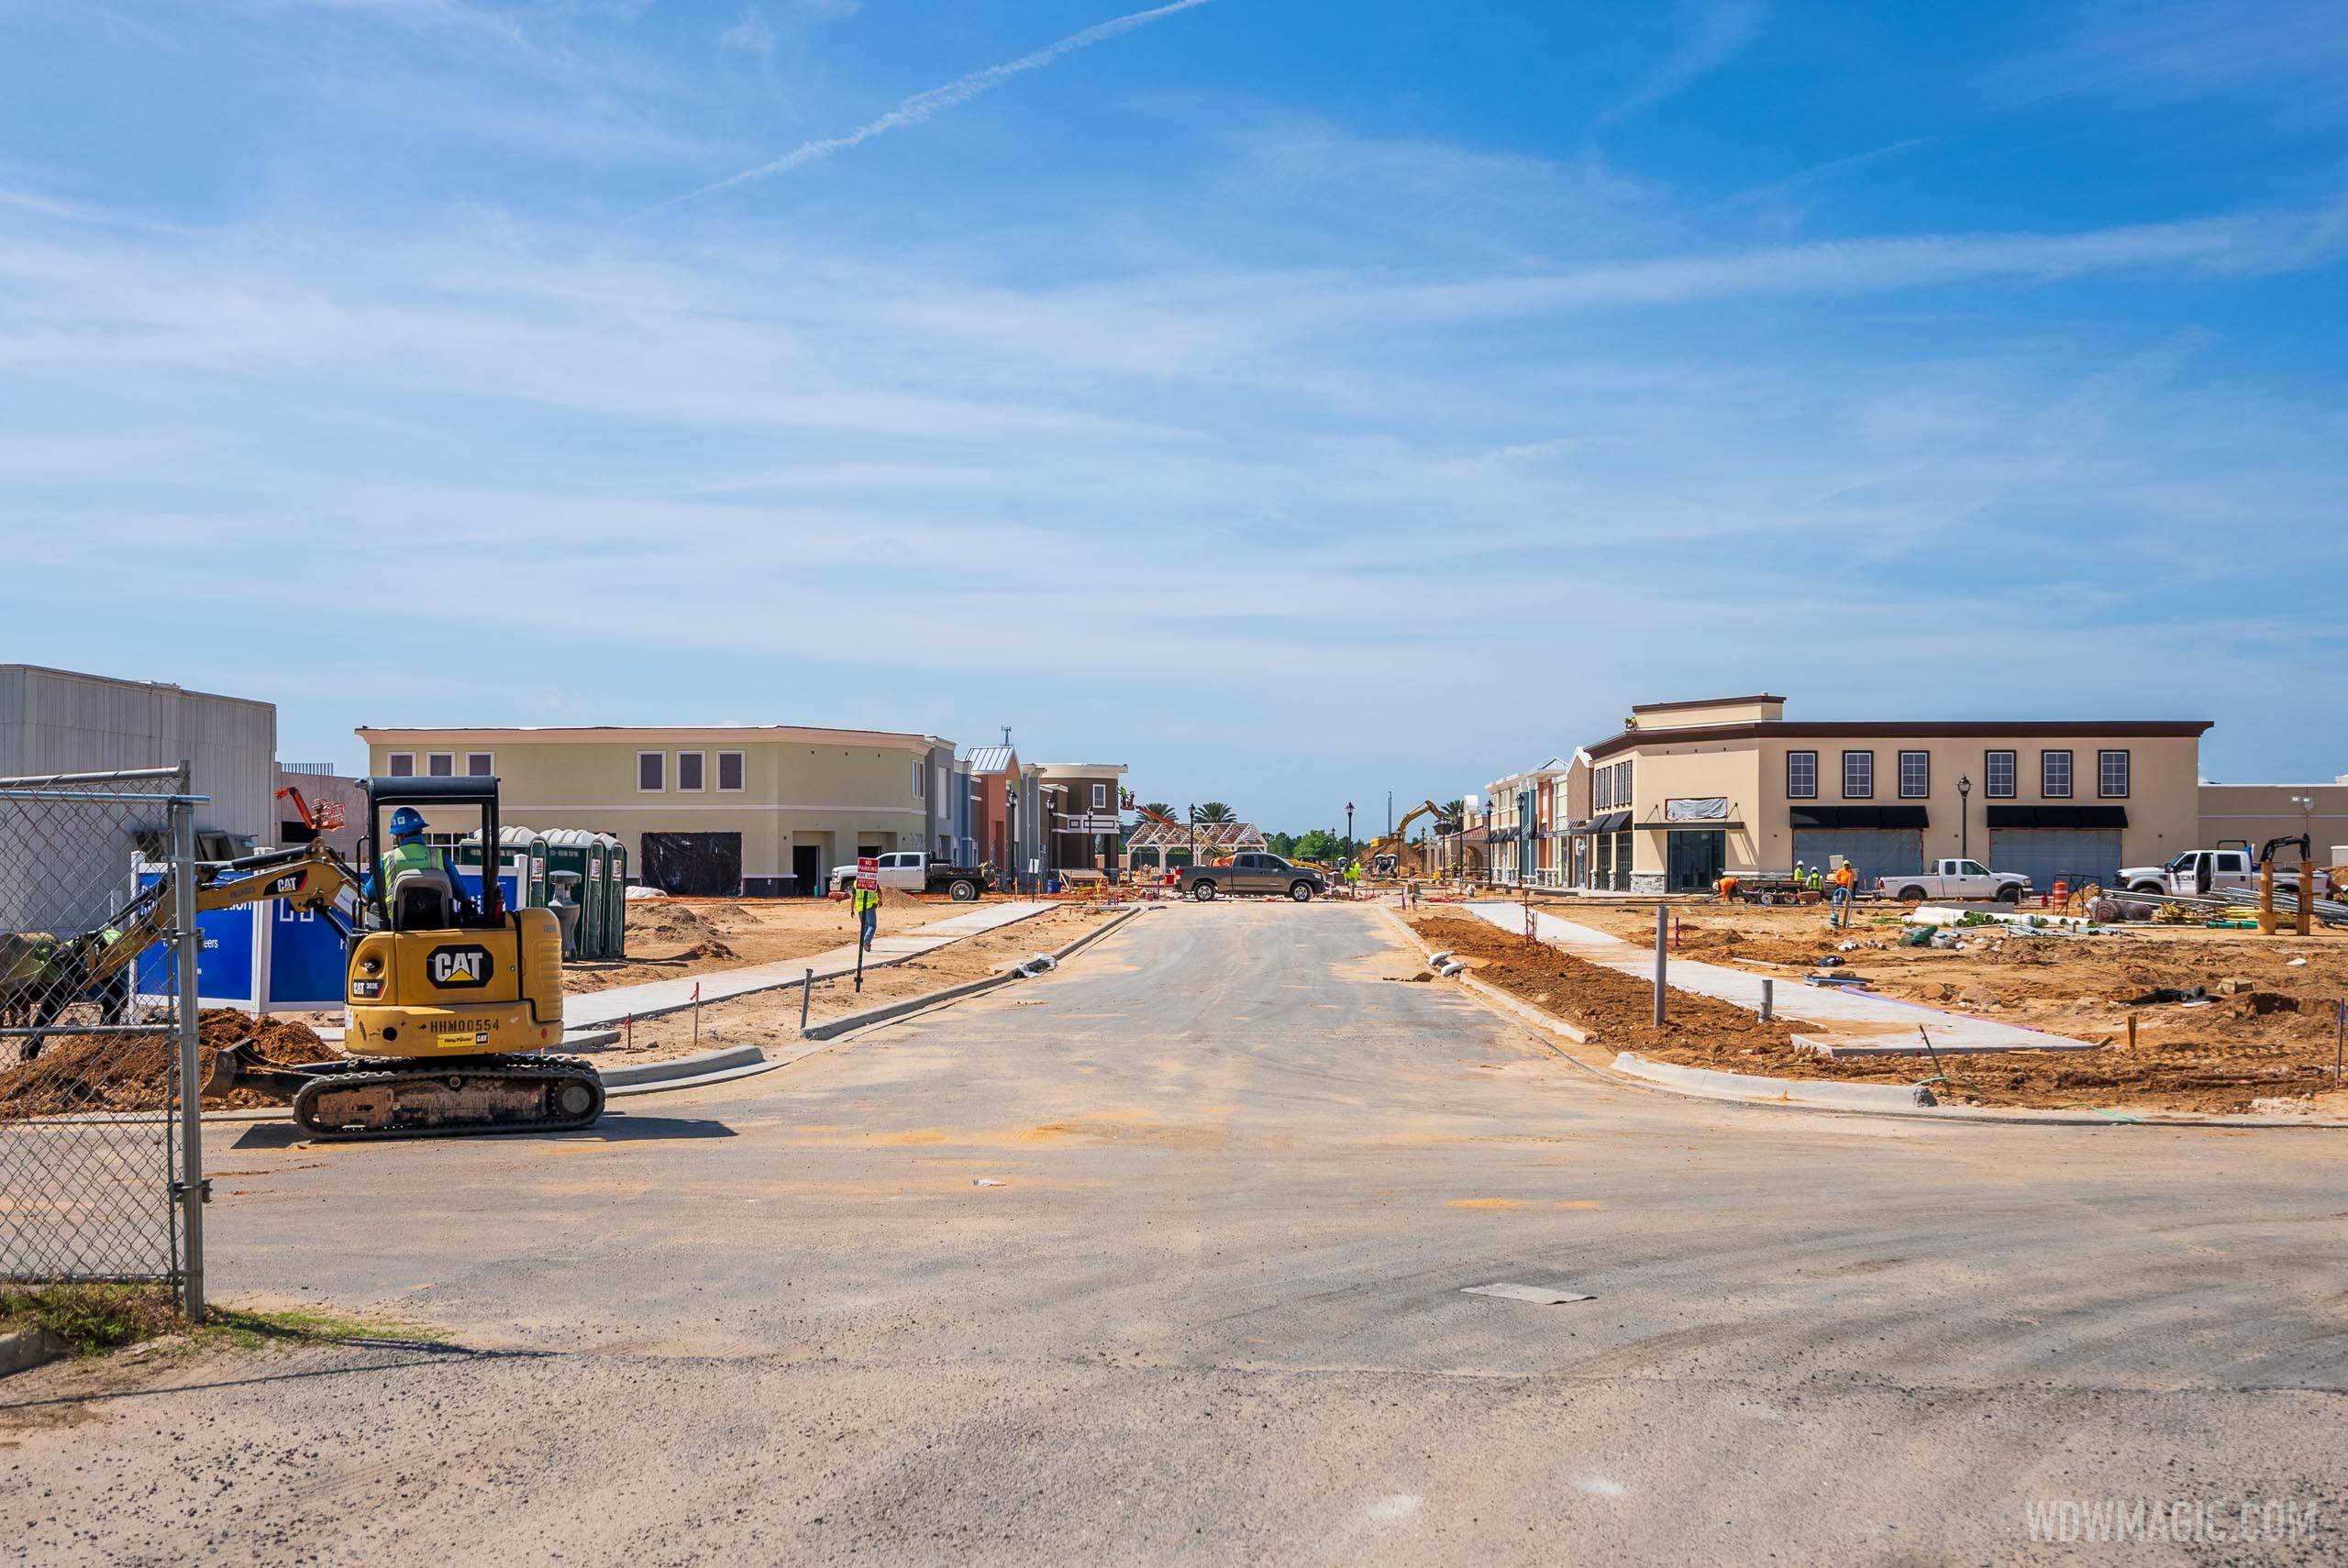 Flamingo Crossings Town Center construction - May 2021